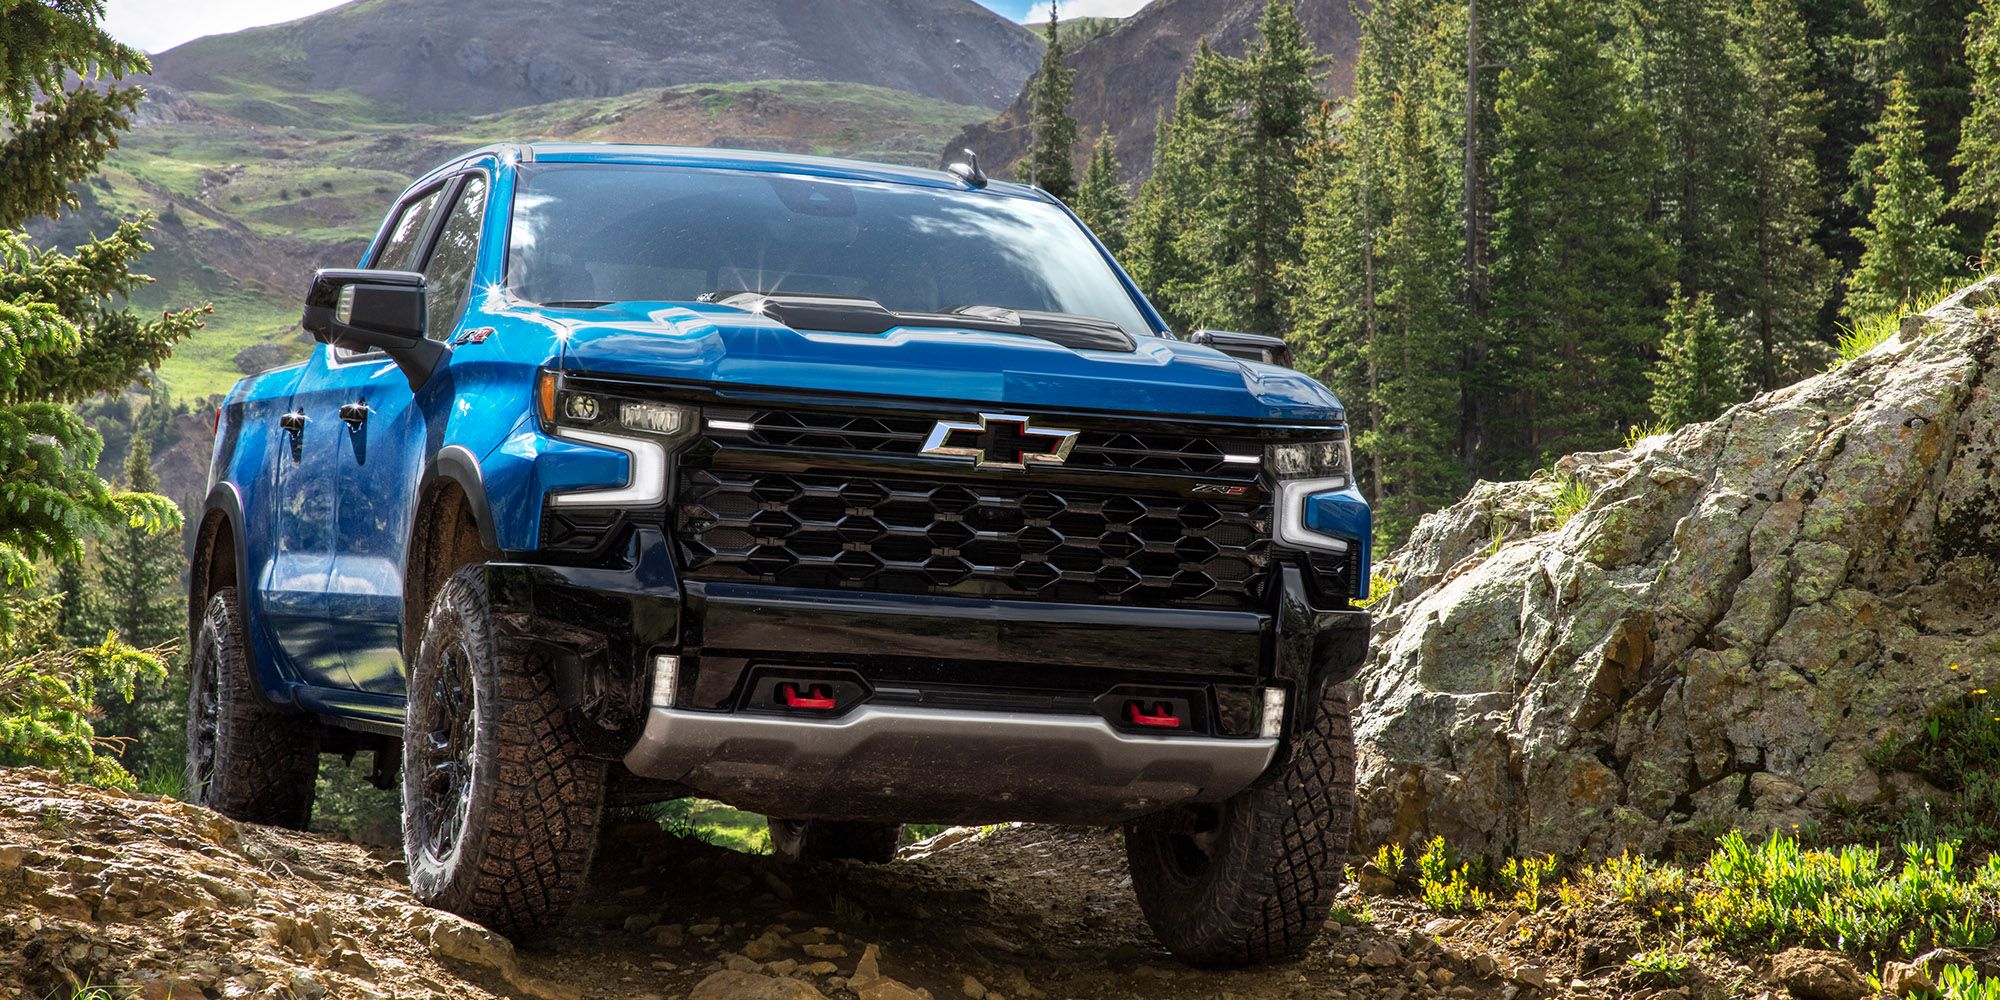 The front of the Silverado ZR2 on a rocky trail